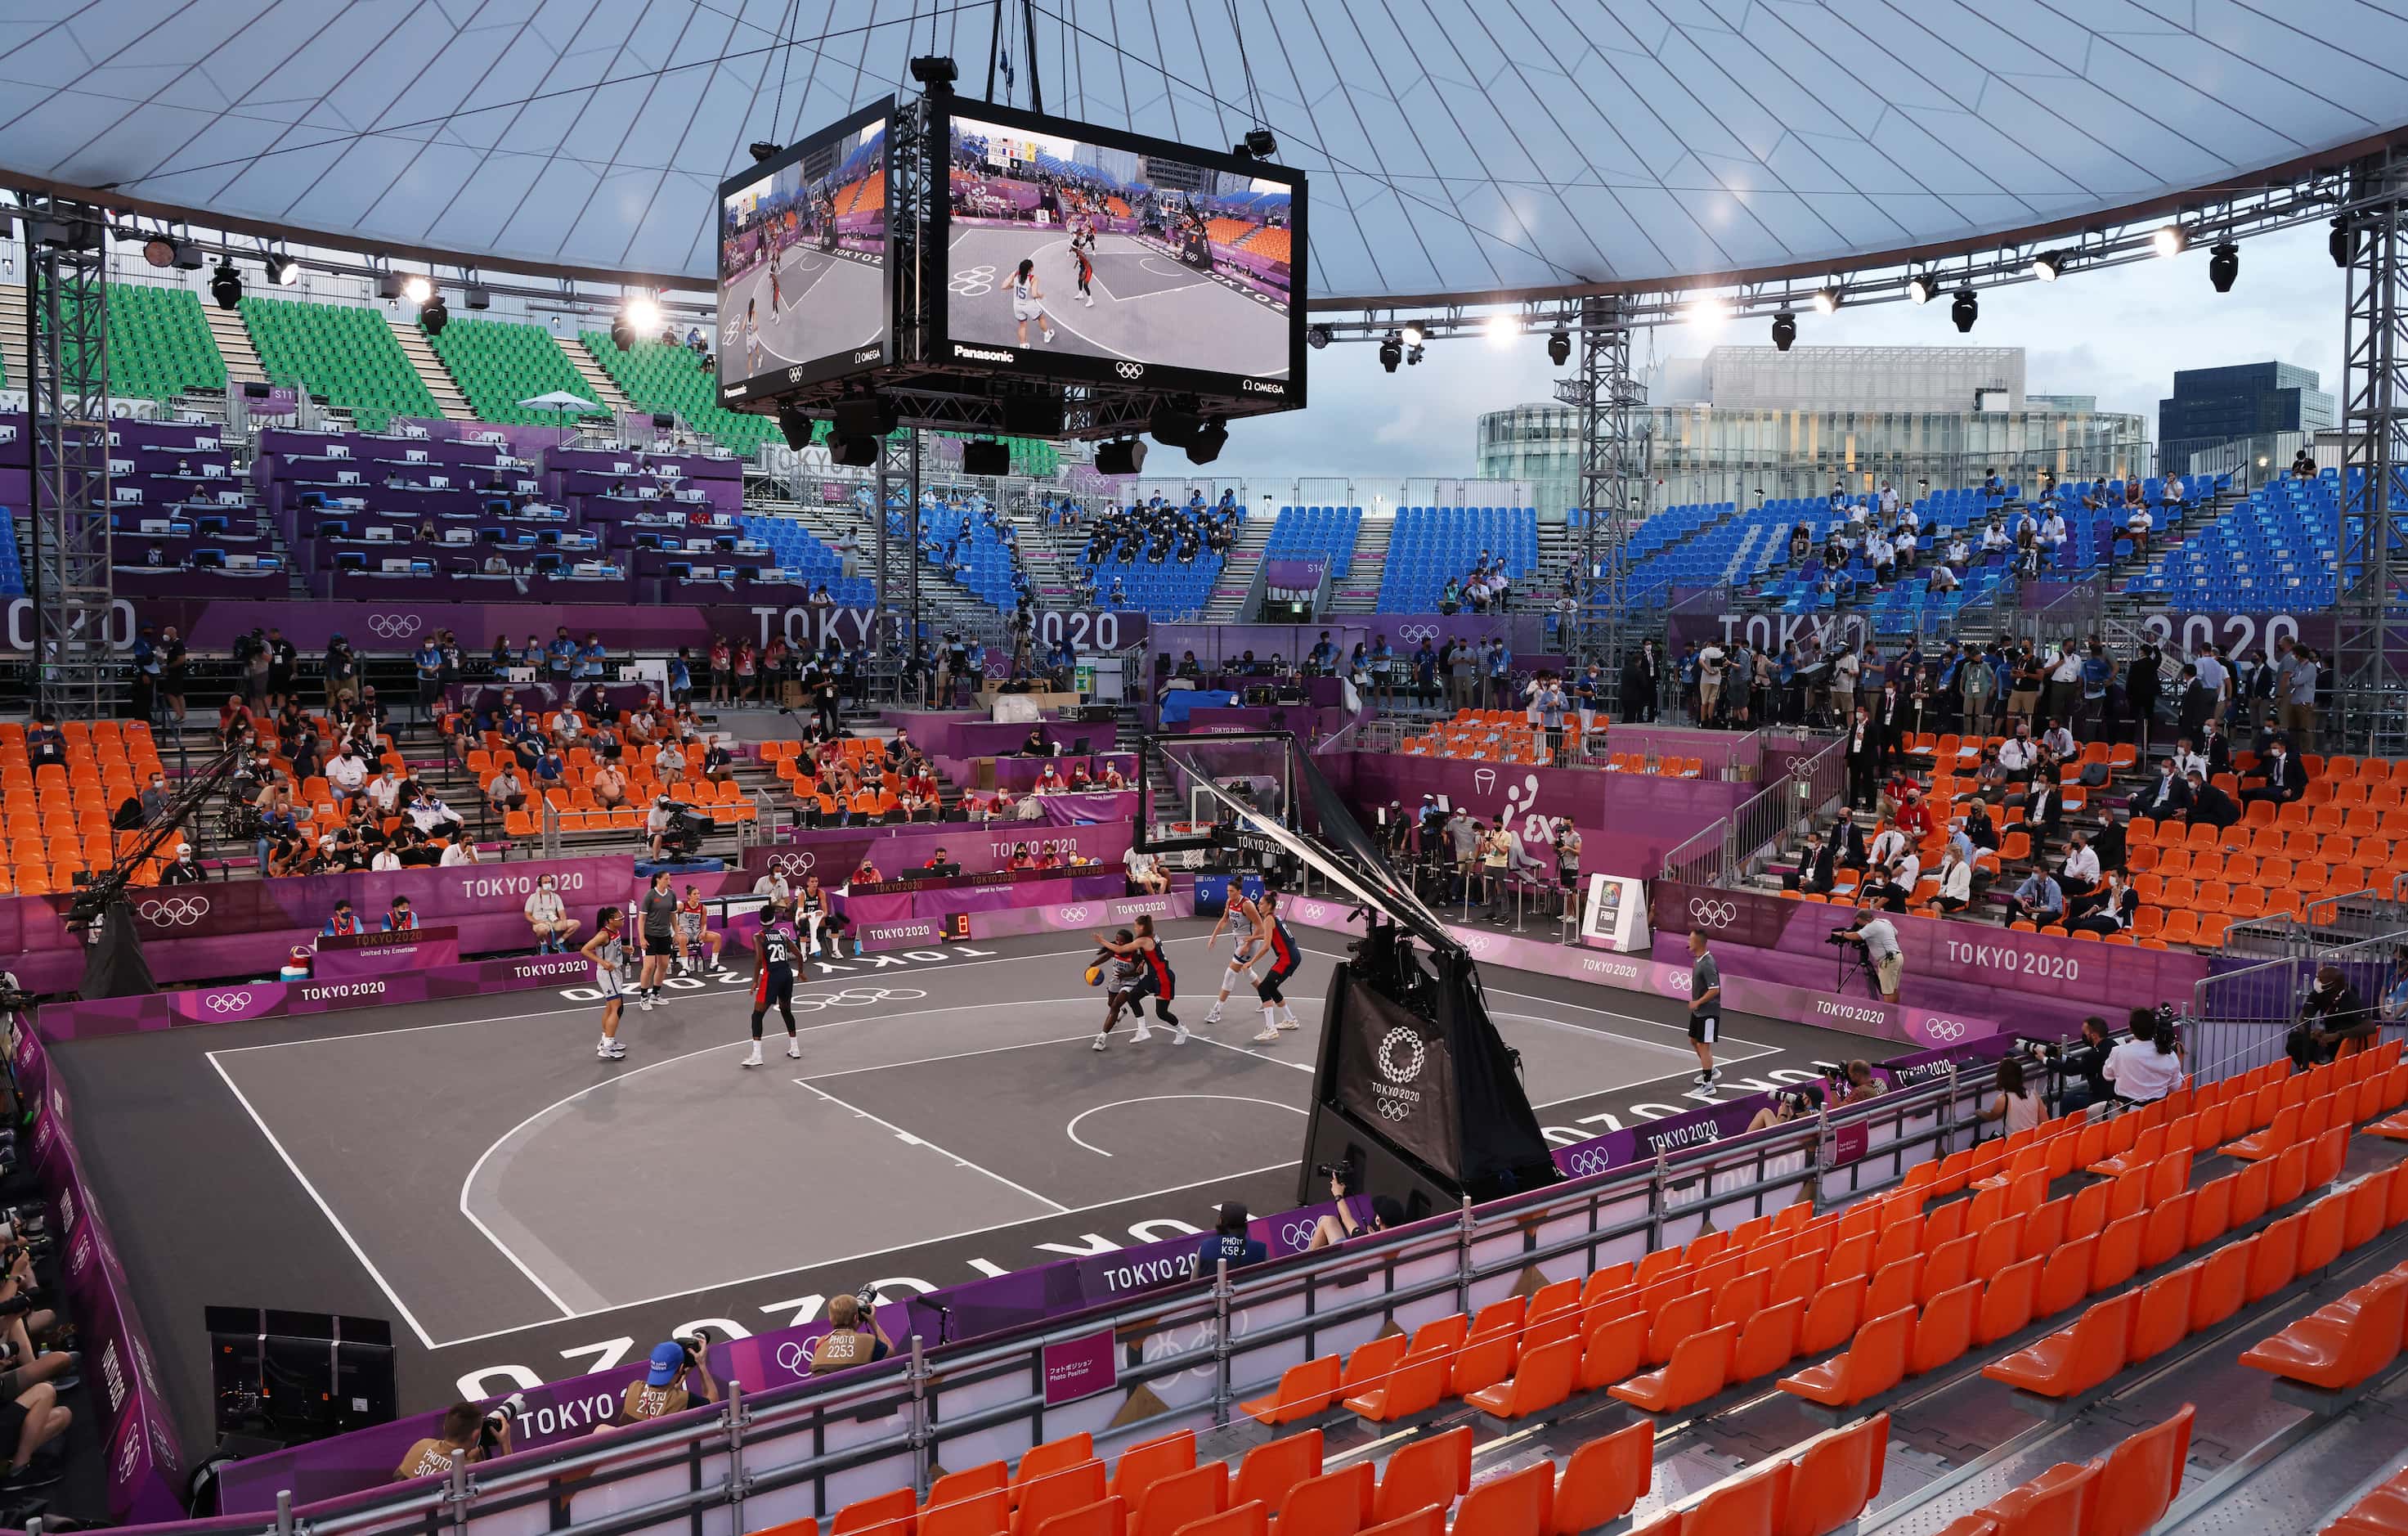 USA plays France in a 3x3 women’s basketball game during the postponed 2020 Tokyo Olympics...